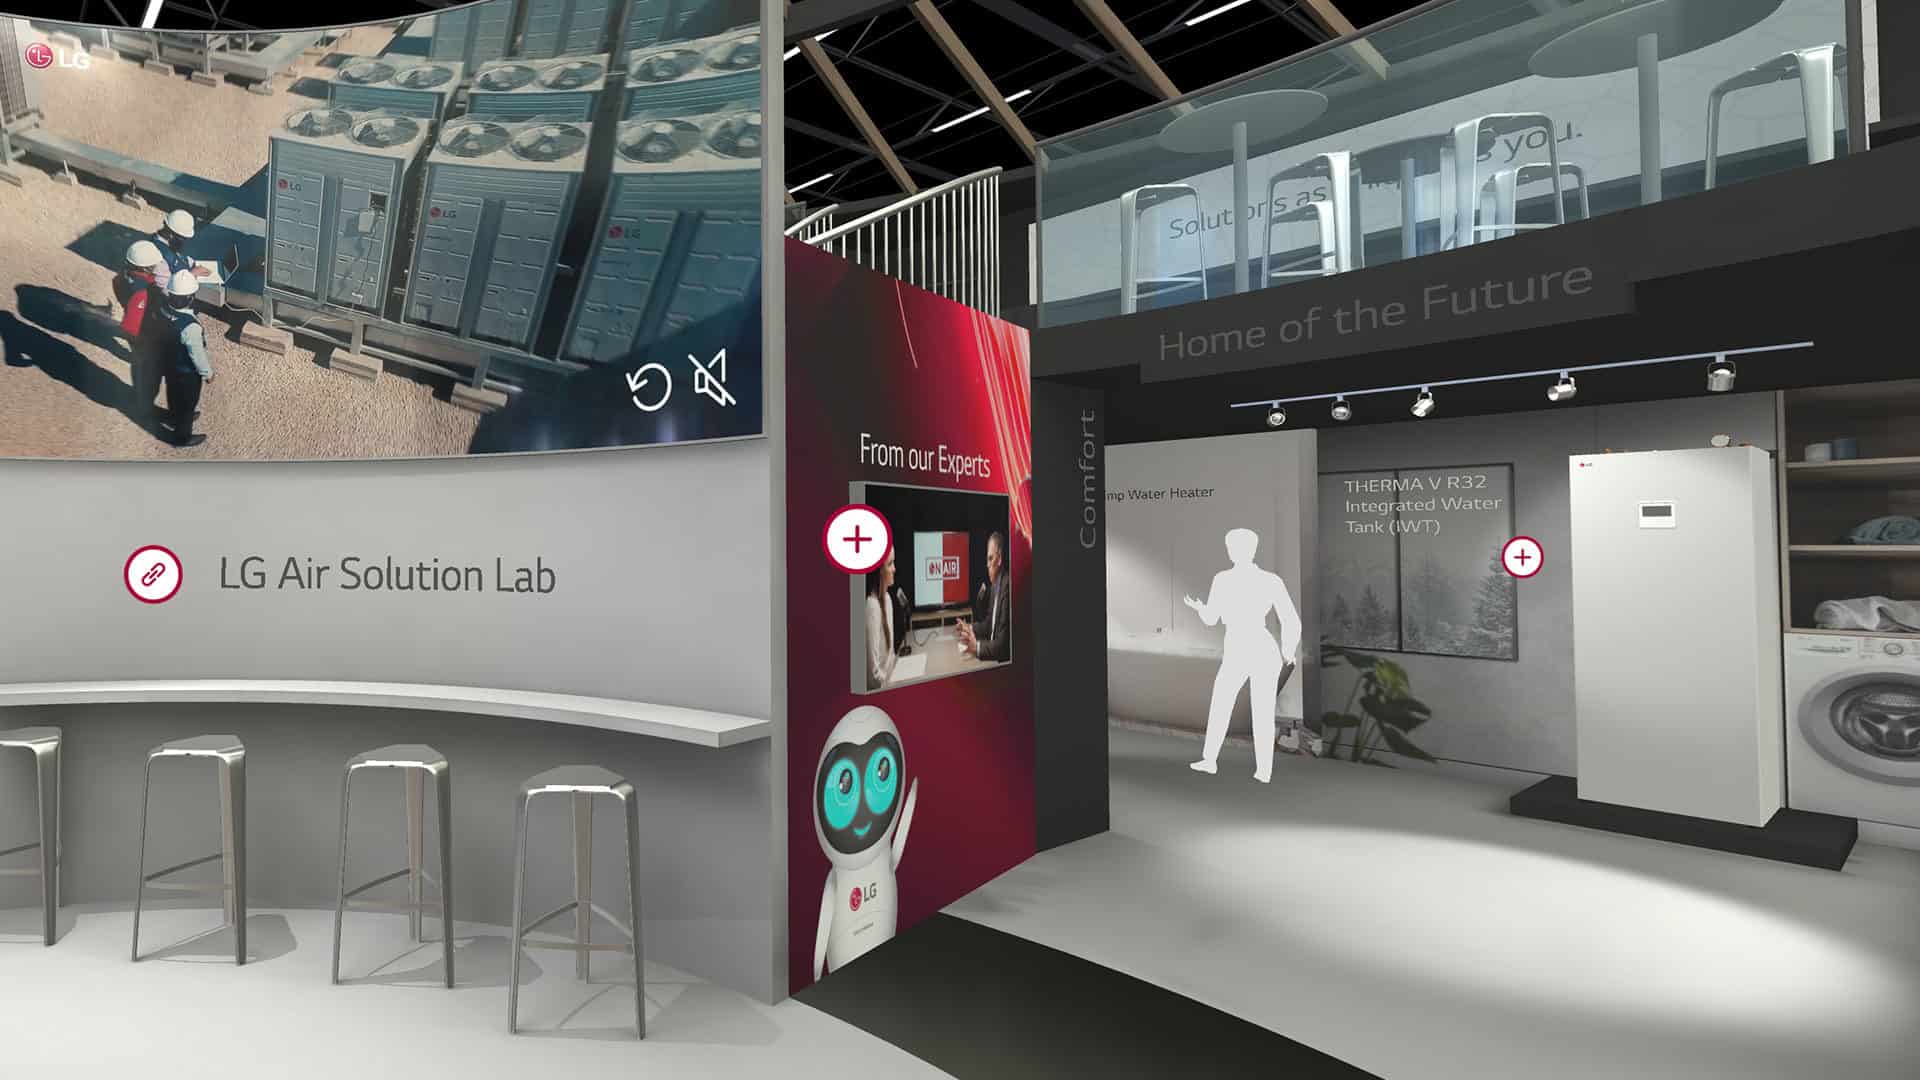 Inside the LG 3D virtual exhibition stand which has branded stands to showcase products.